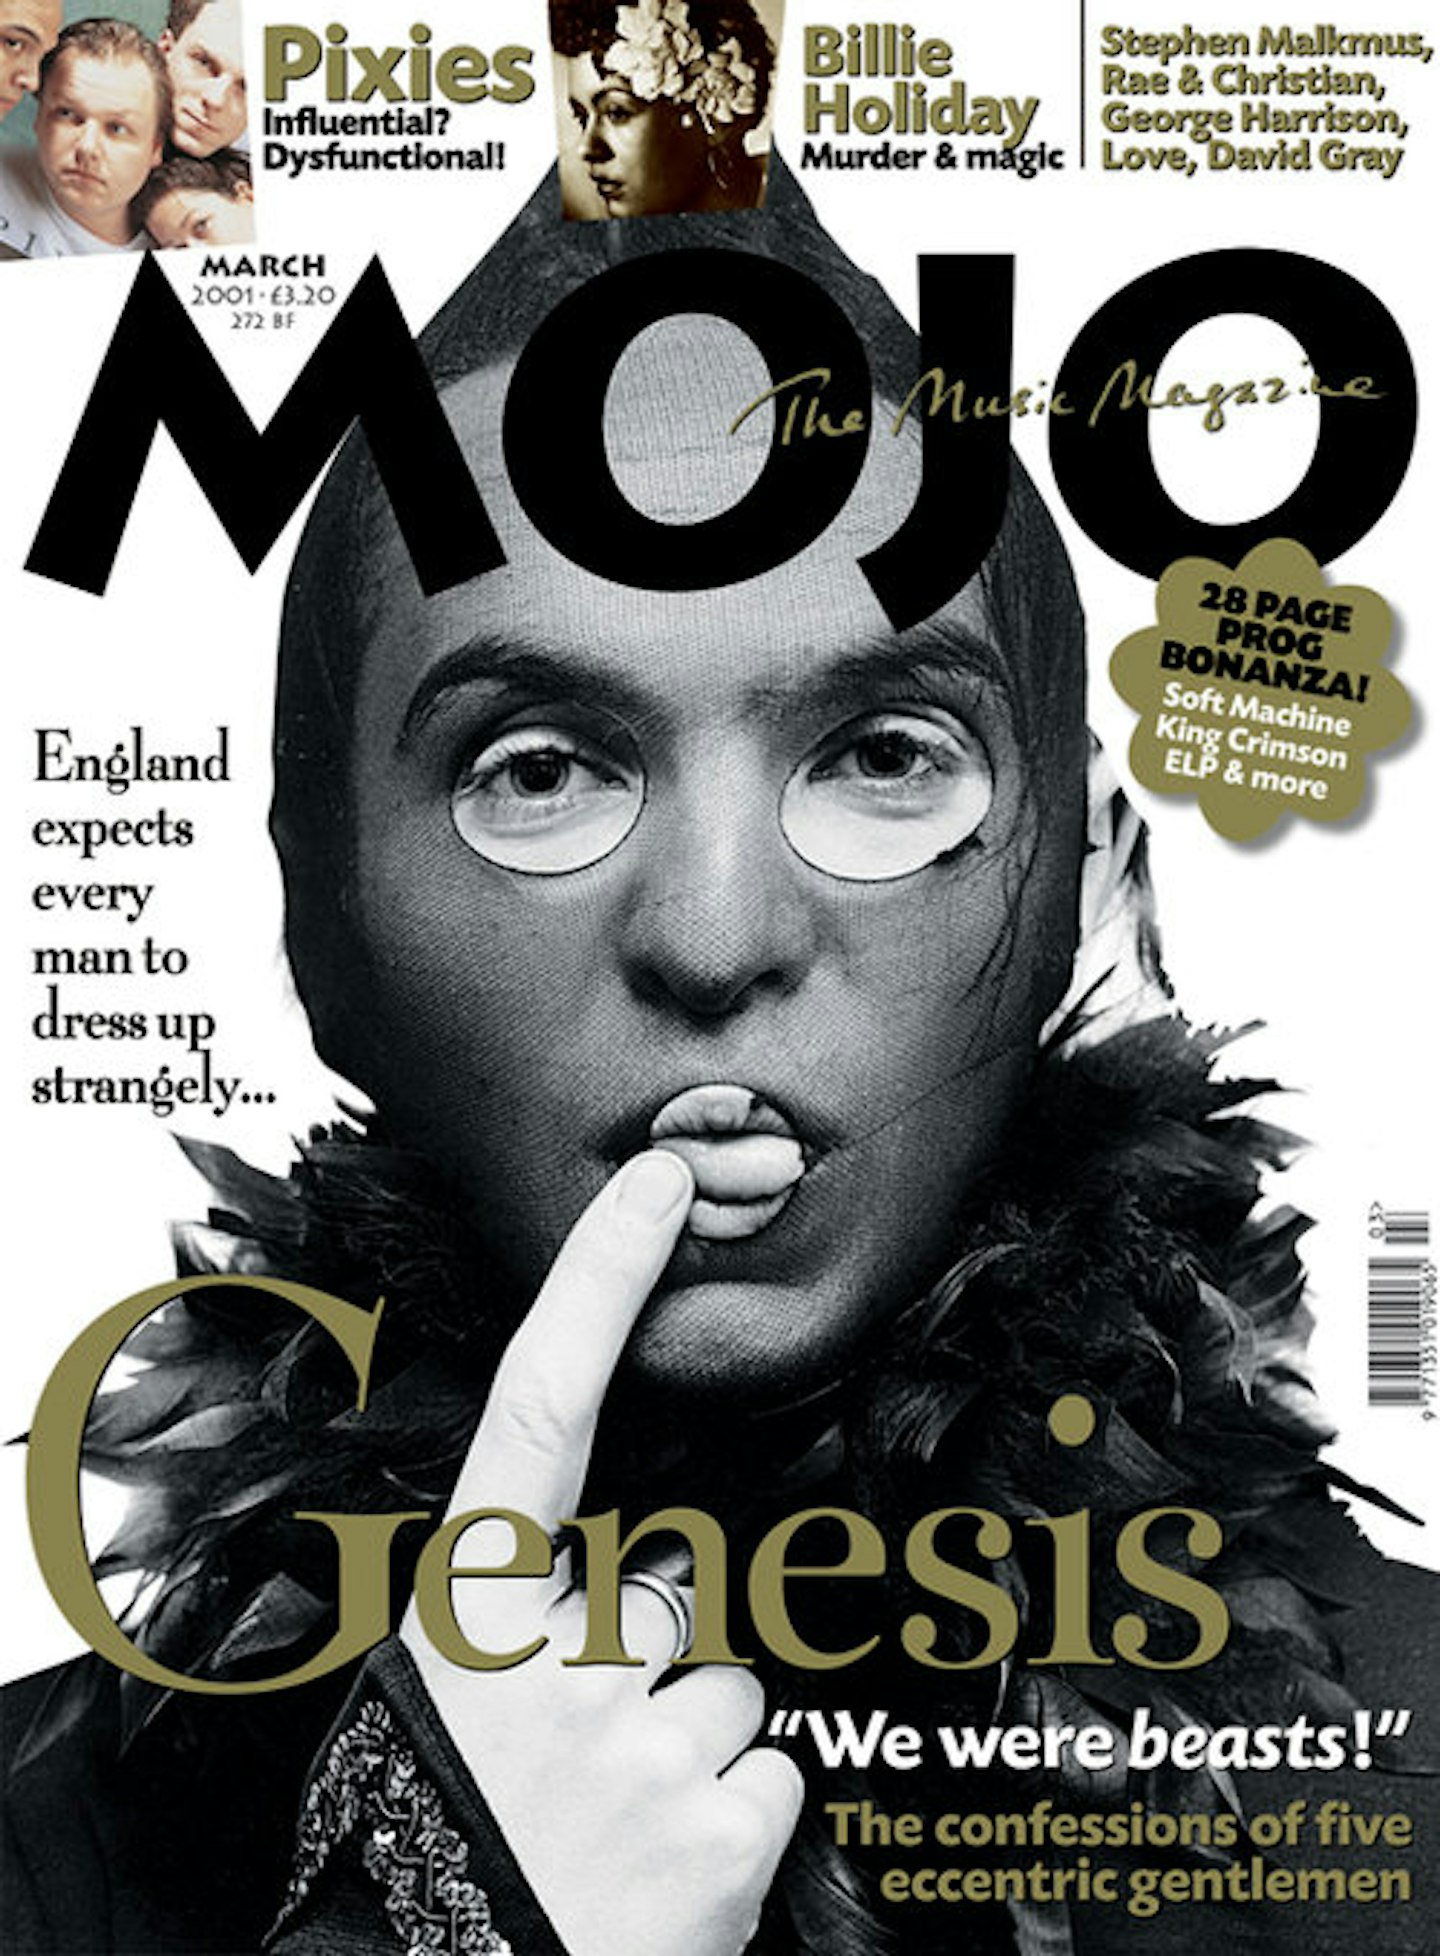 MOJO Issue 88 / March 2001